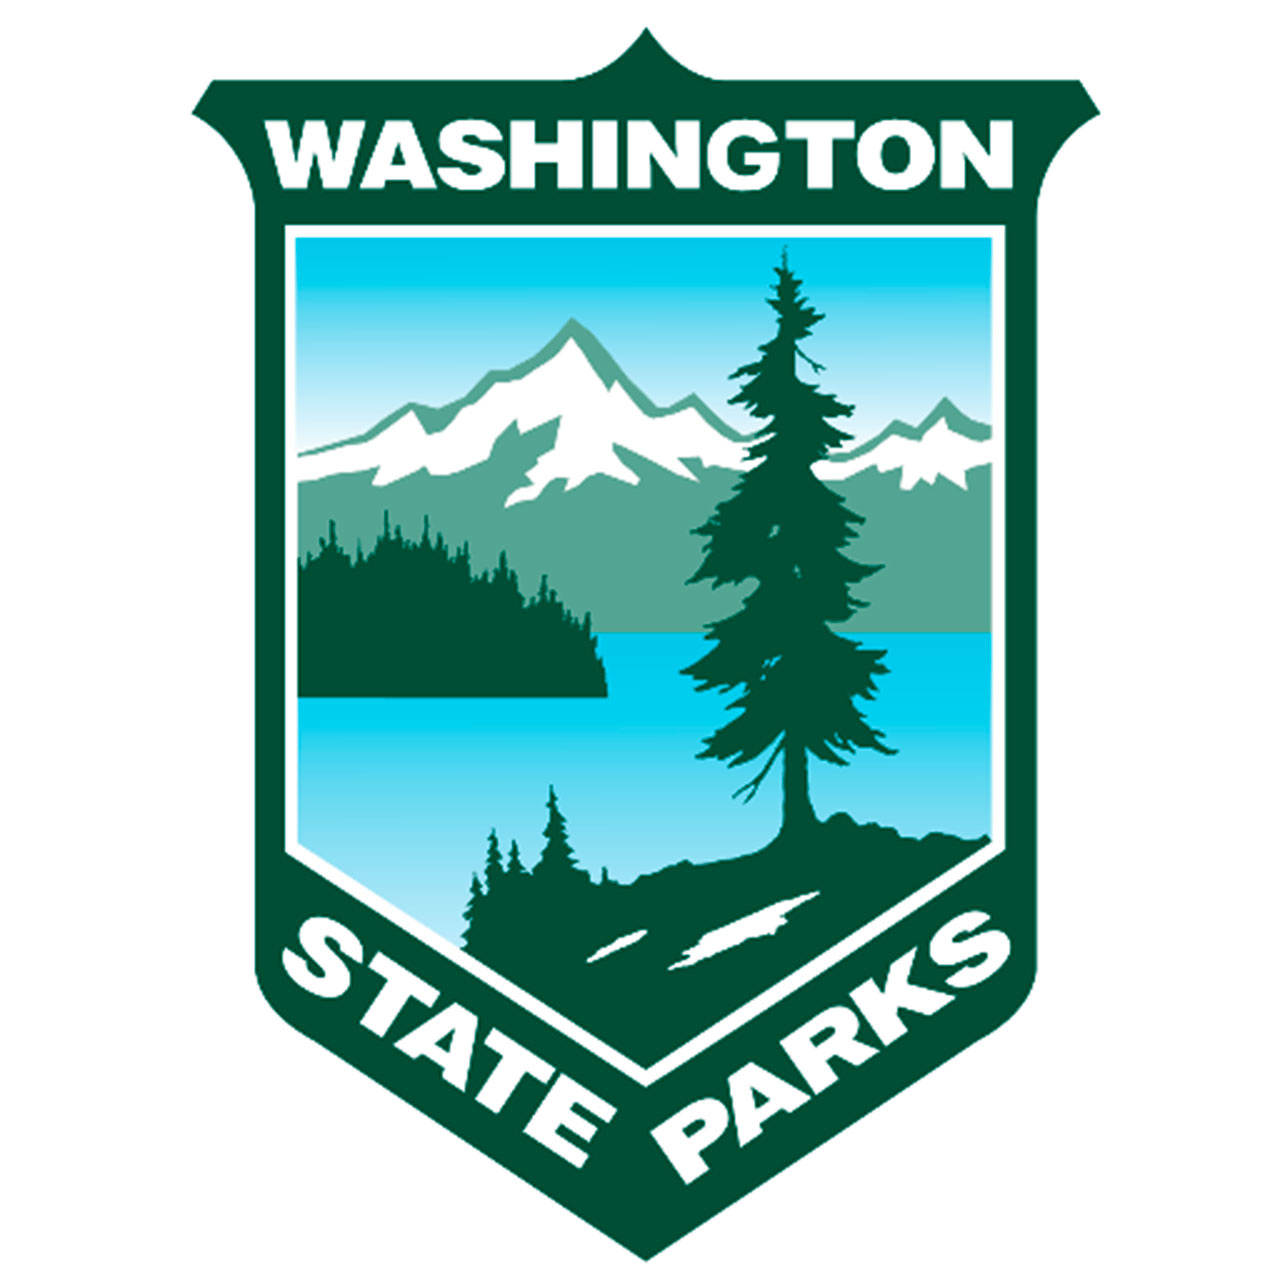 Washington State Parks offers two free days in January